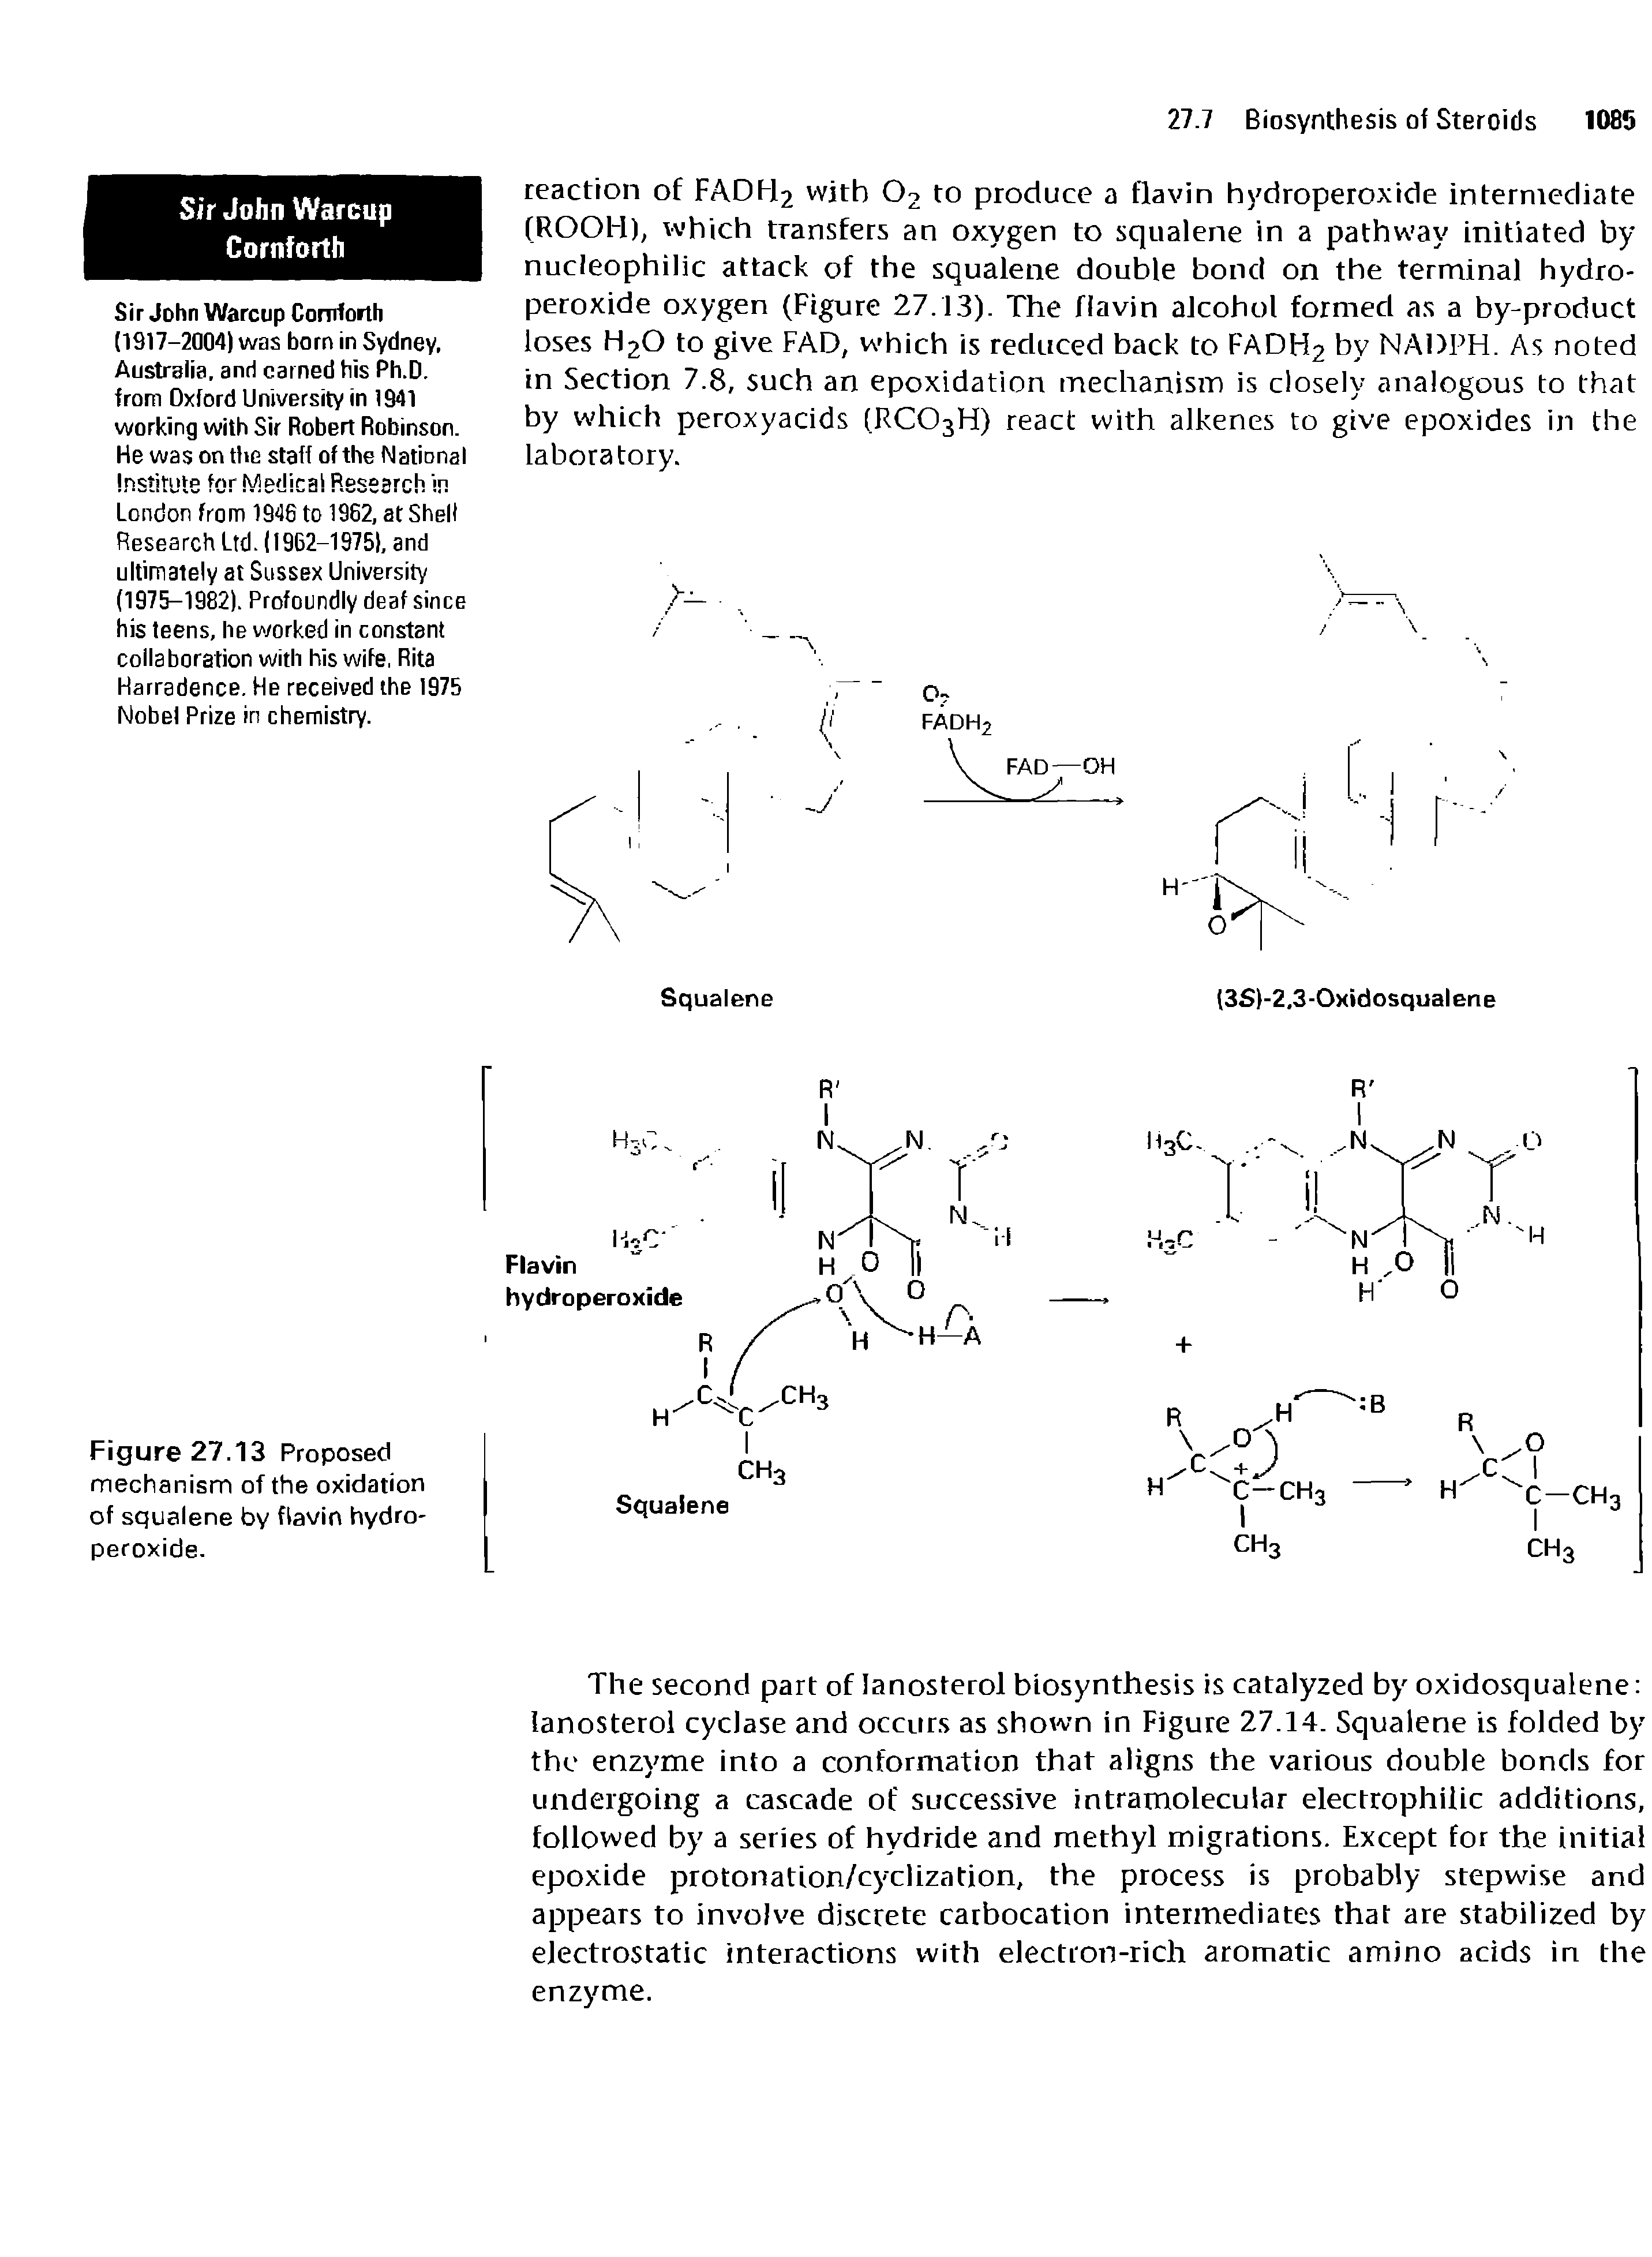 Figure 27.13 Proposed mechanism of the oxidation of squalene by flavin hydroperoxide.